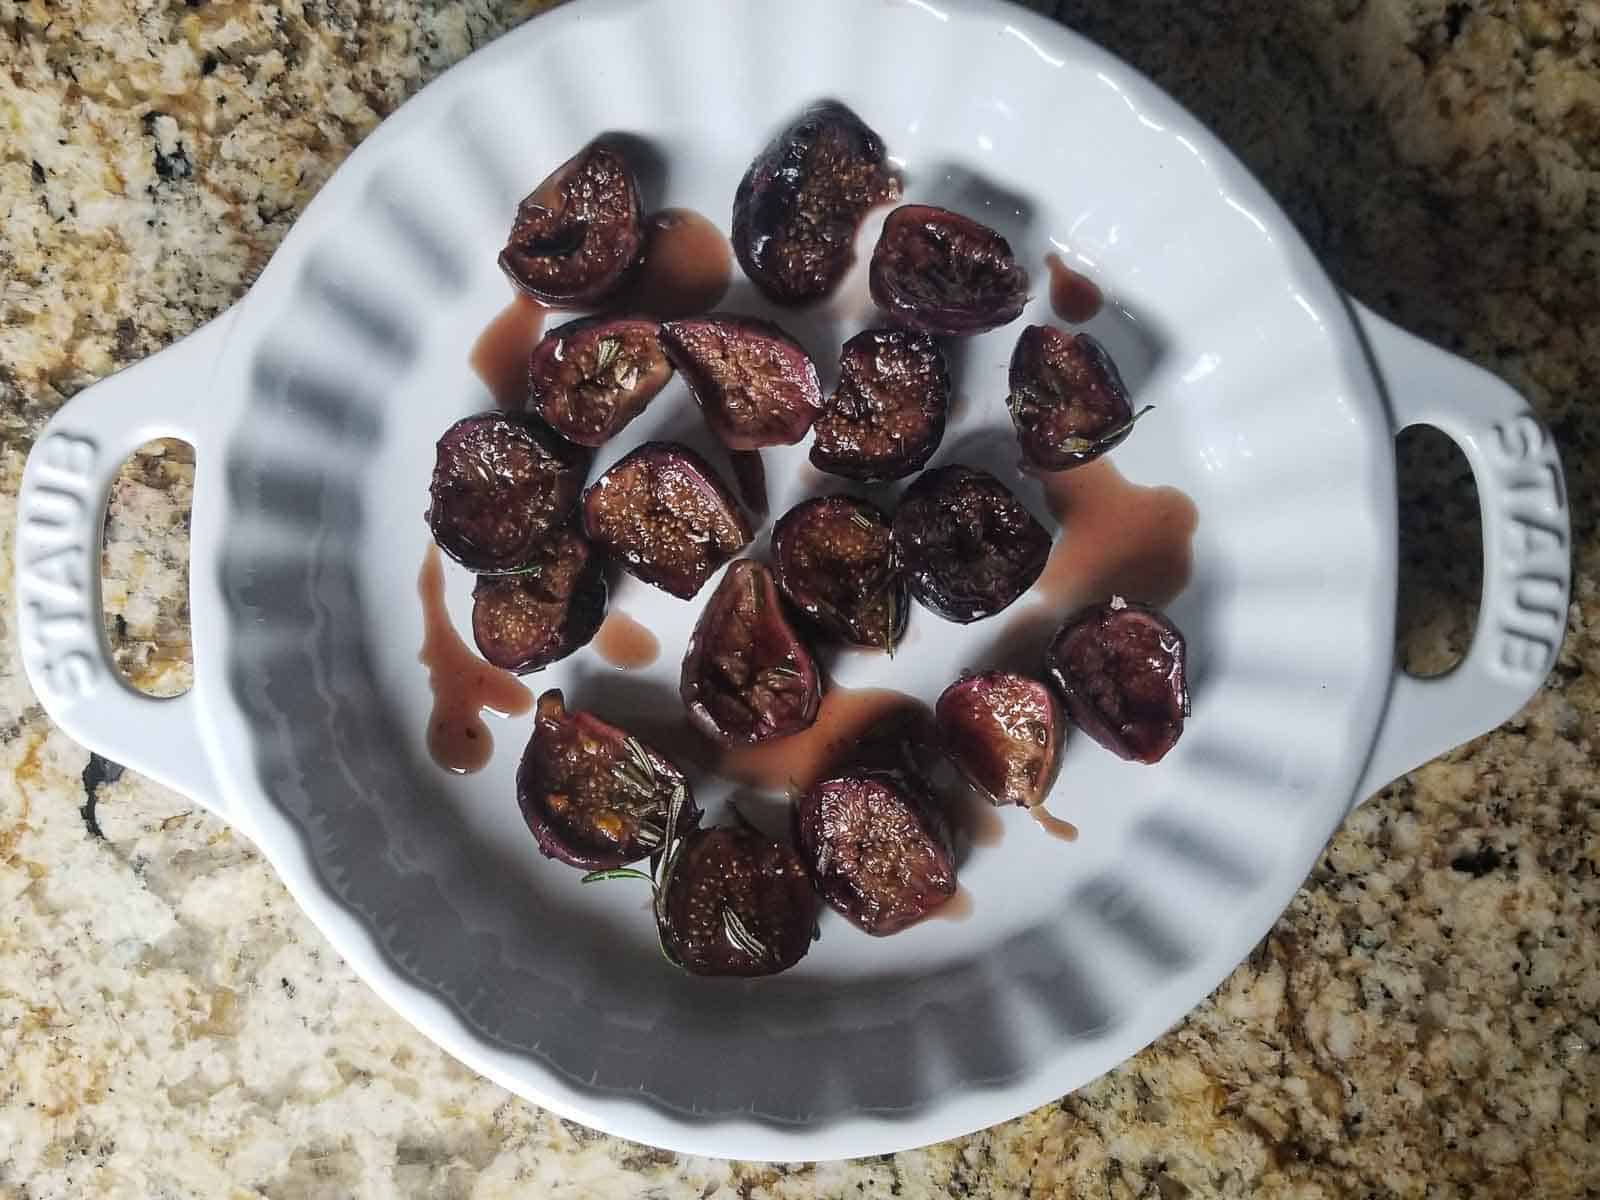 Roasted figs out of the oven in a white baking pan.